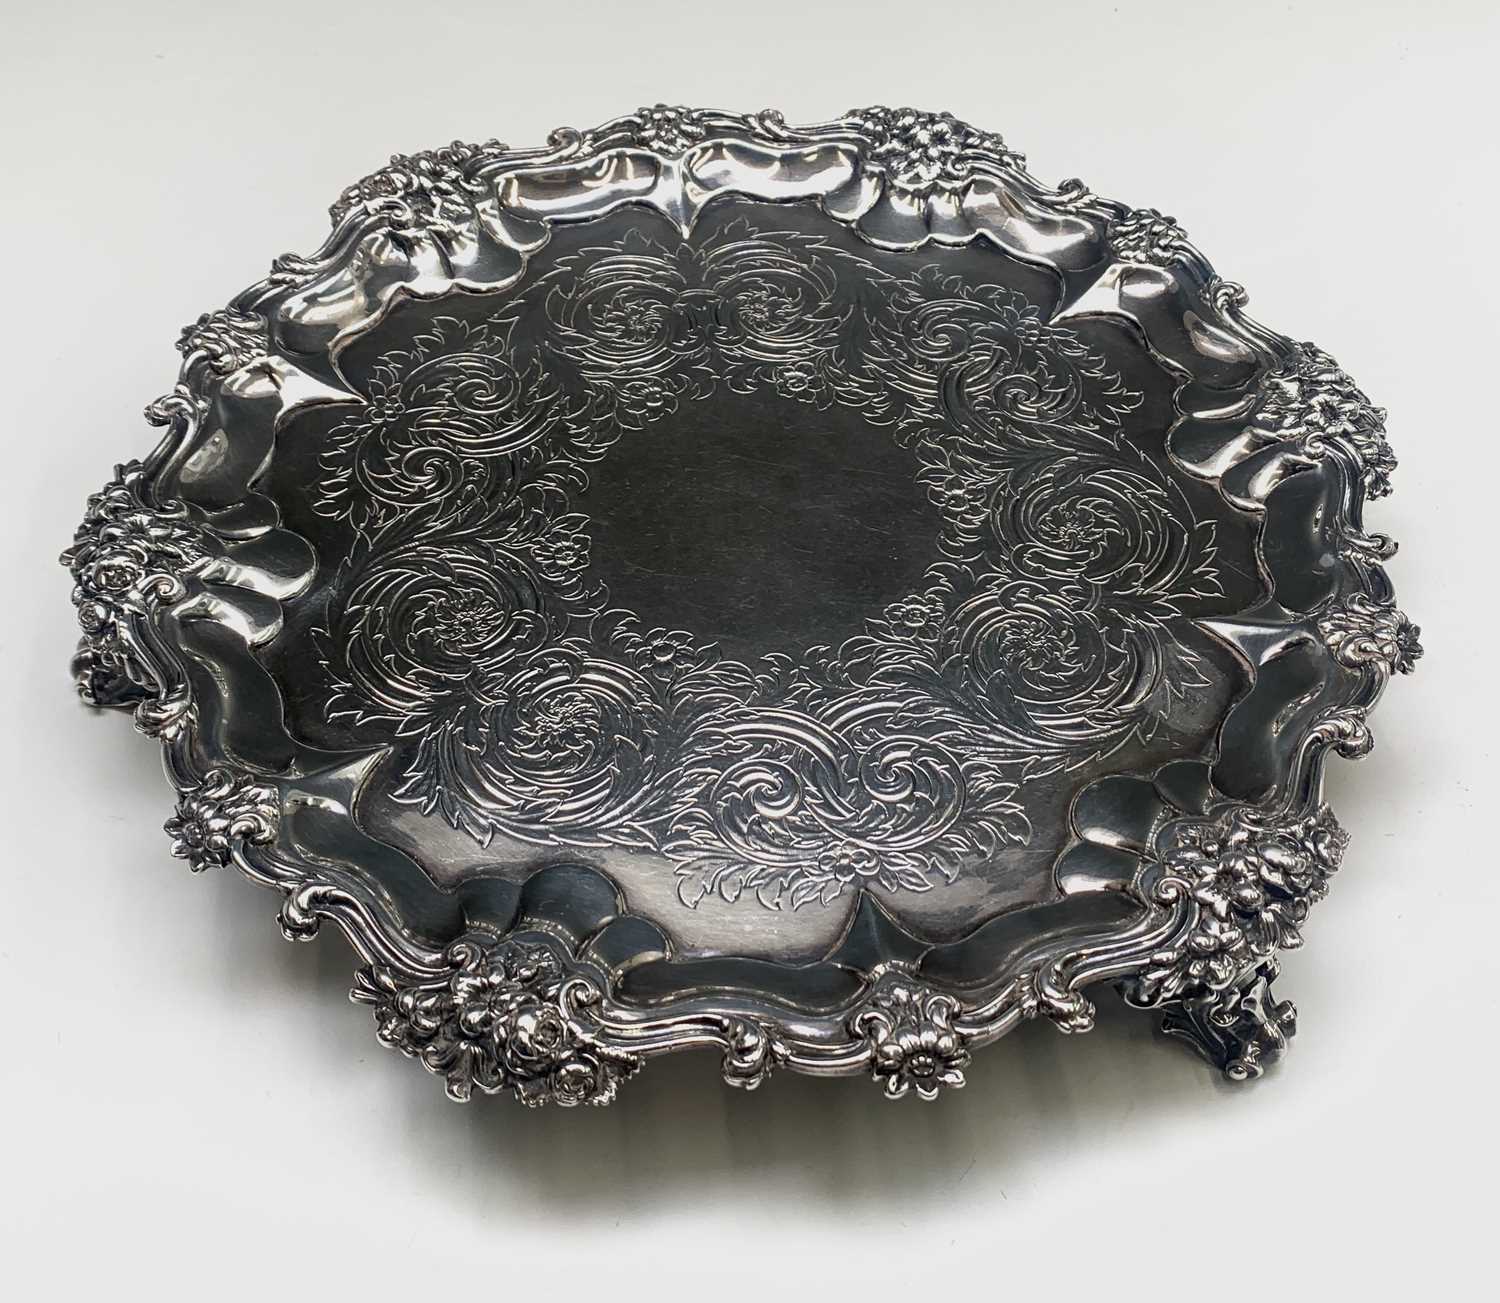 A William IV Silver Salver with scrolling acanthus leaf and floral decoration on three cast feet